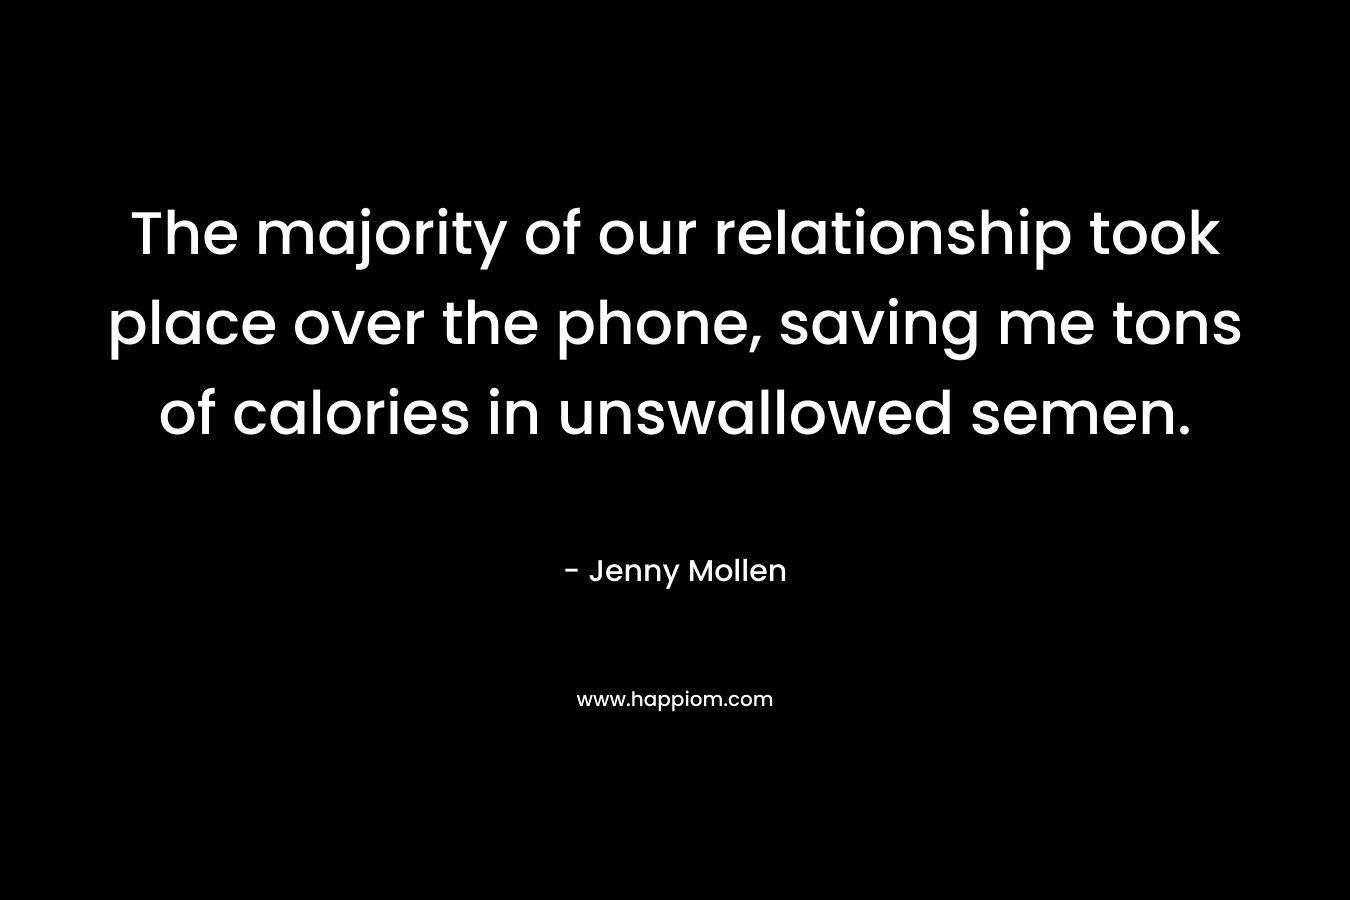 The majority of our relationship took place over the phone, saving me tons of calories in unswallowed semen.